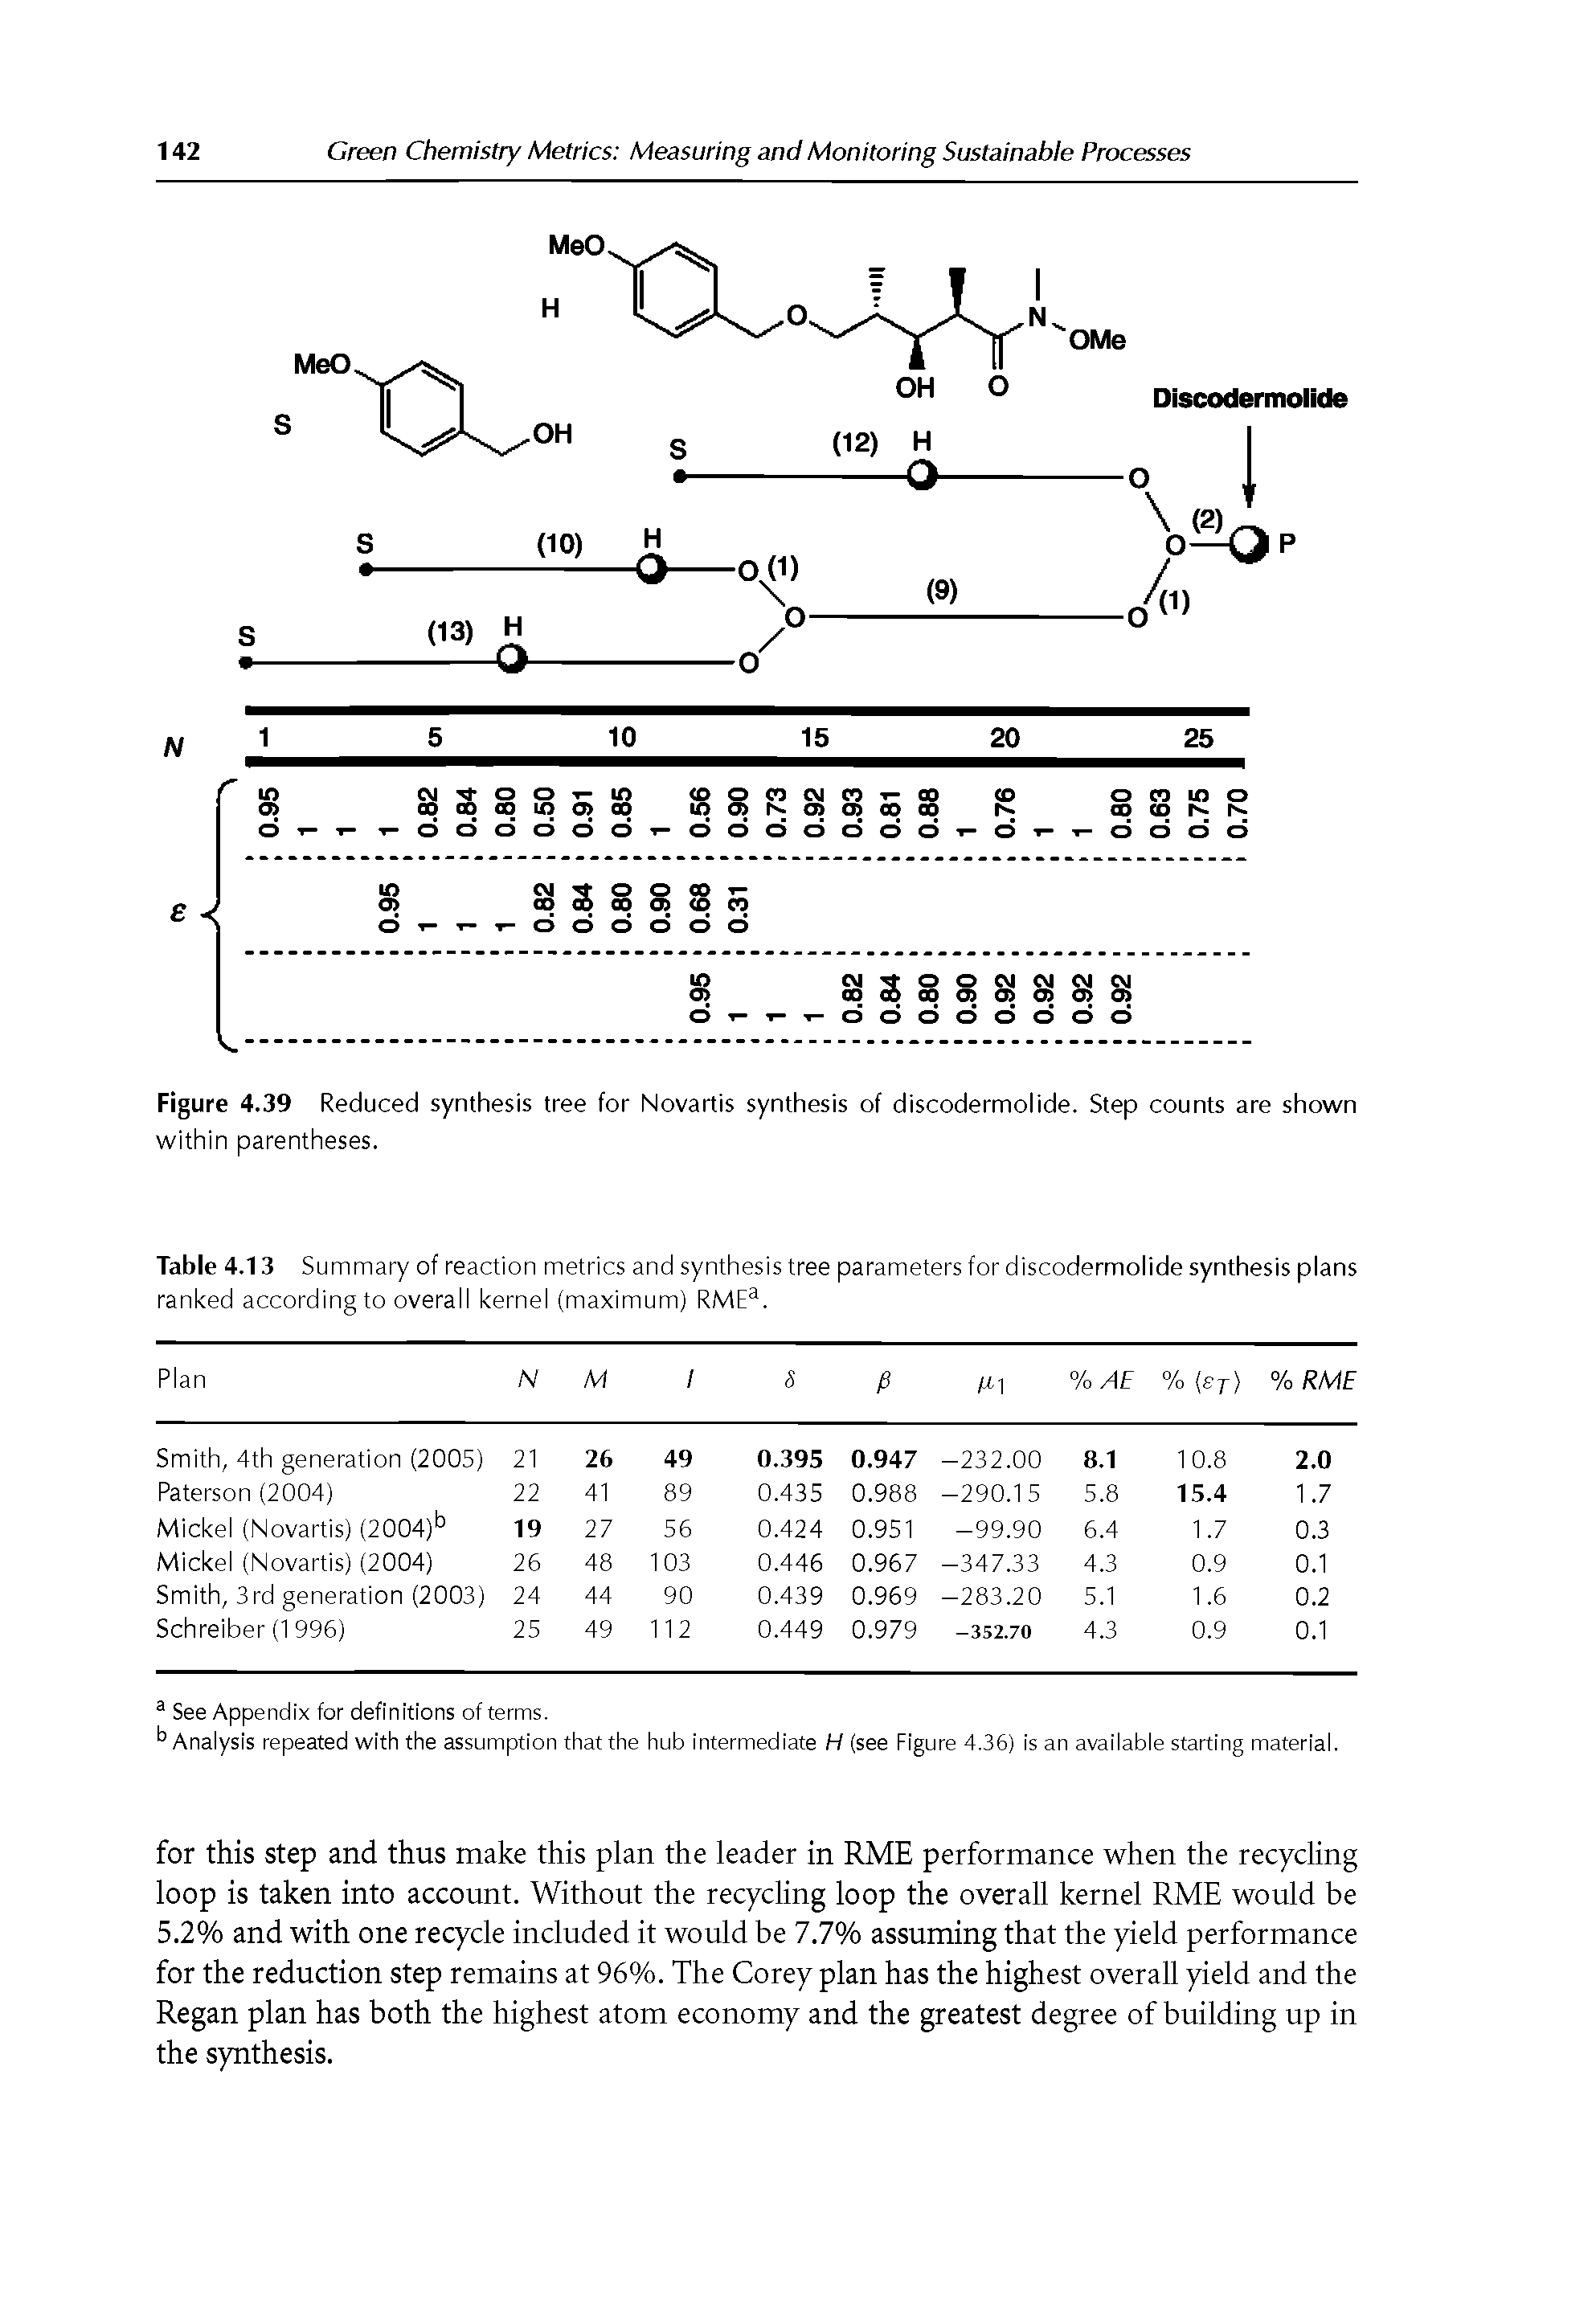 Figure 4.39 Reduced synthesis tree for Novartis synthesis of discodermoiide. Step counts are shown within parentheses.